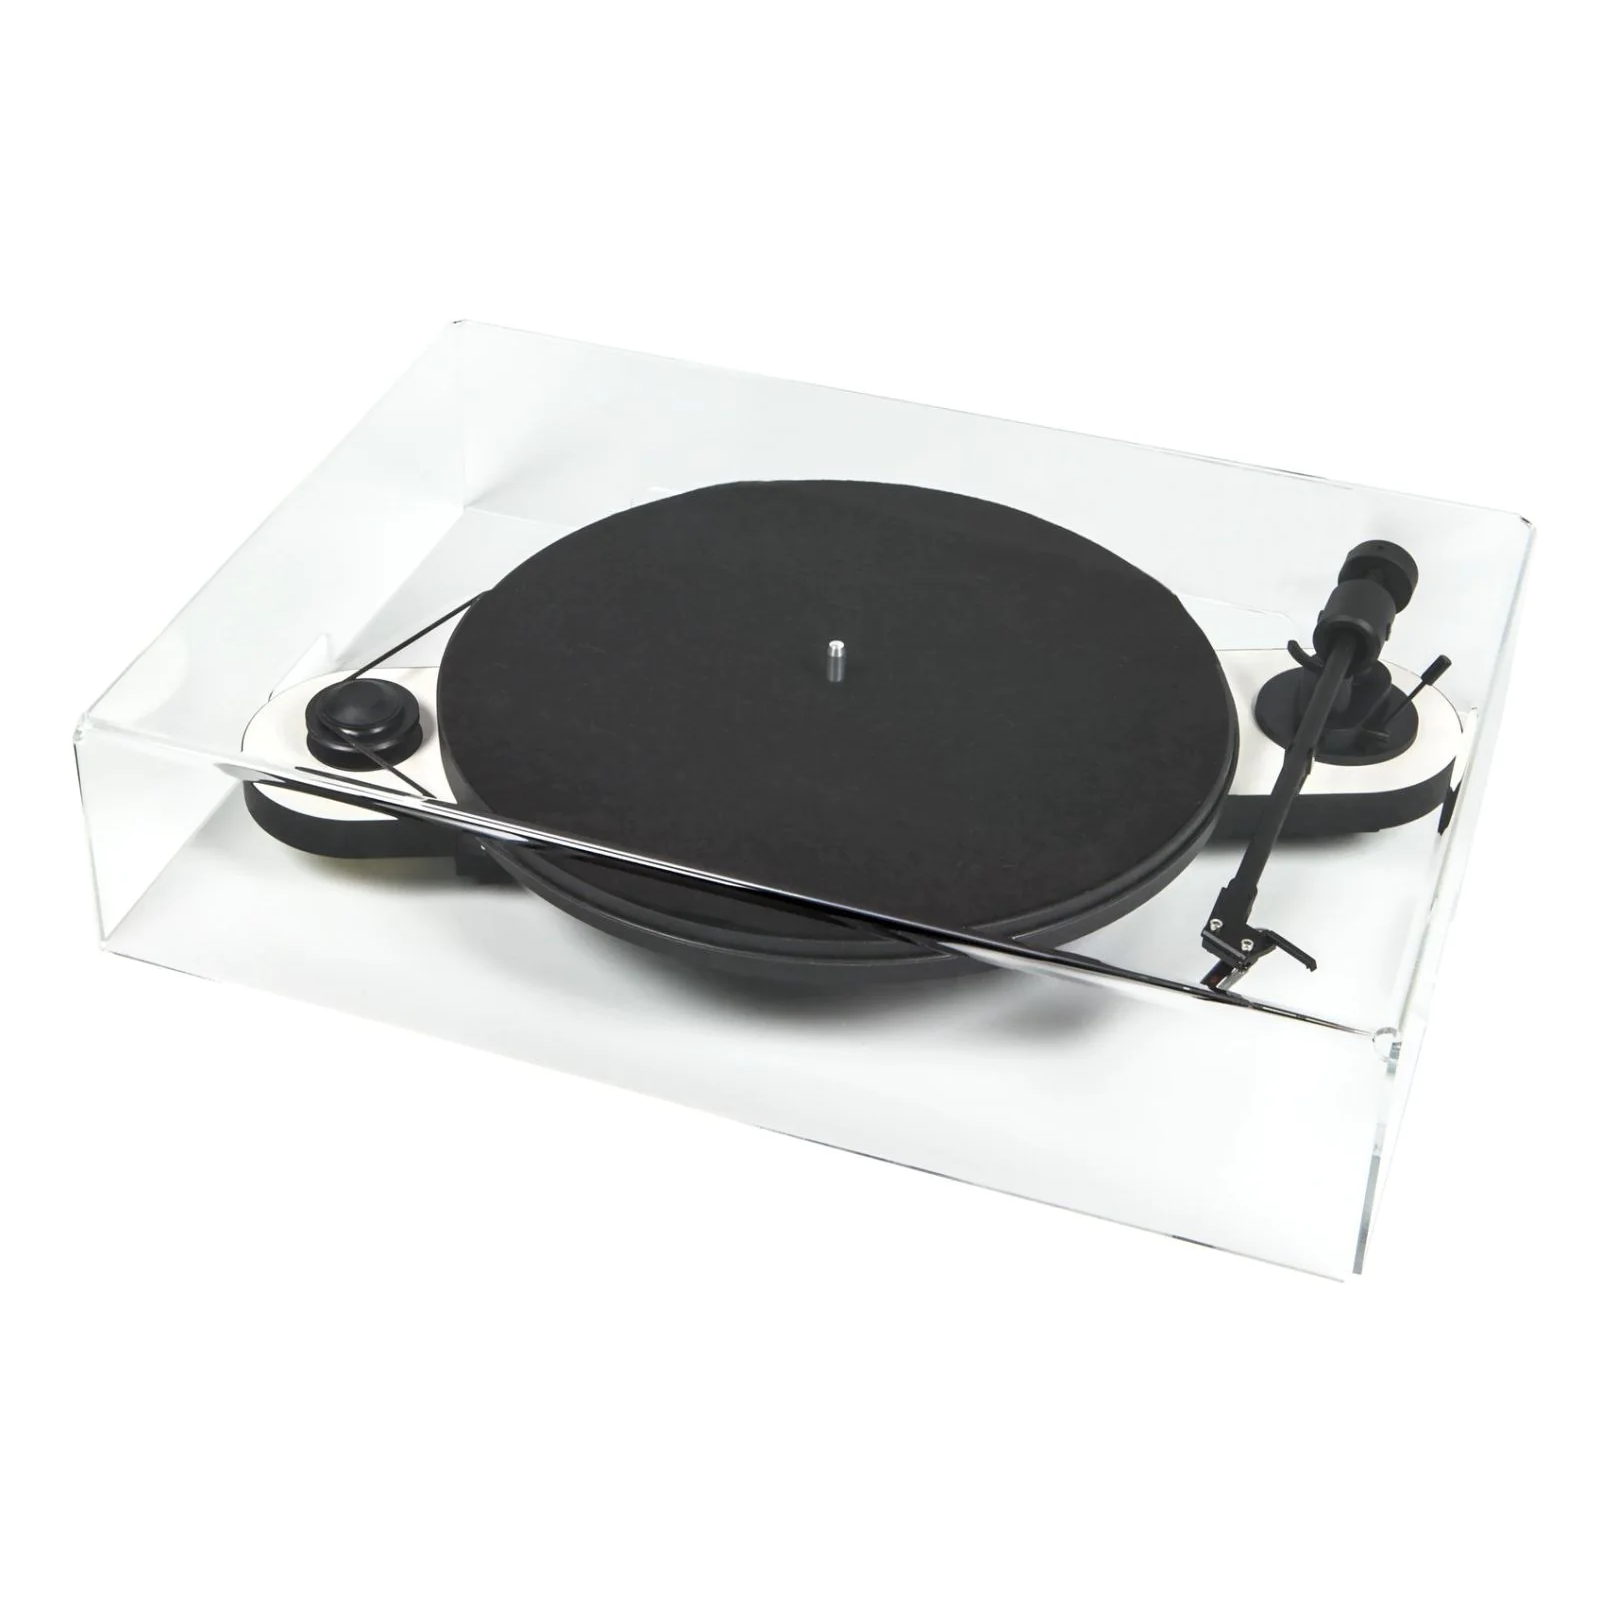 PRO-JECT COVER IT E | VINYL SOUND Dust protection cover Crystal clear acrylic cover for turntables Protects turntable and needle suitable for: Elemental Elemental Phono USB